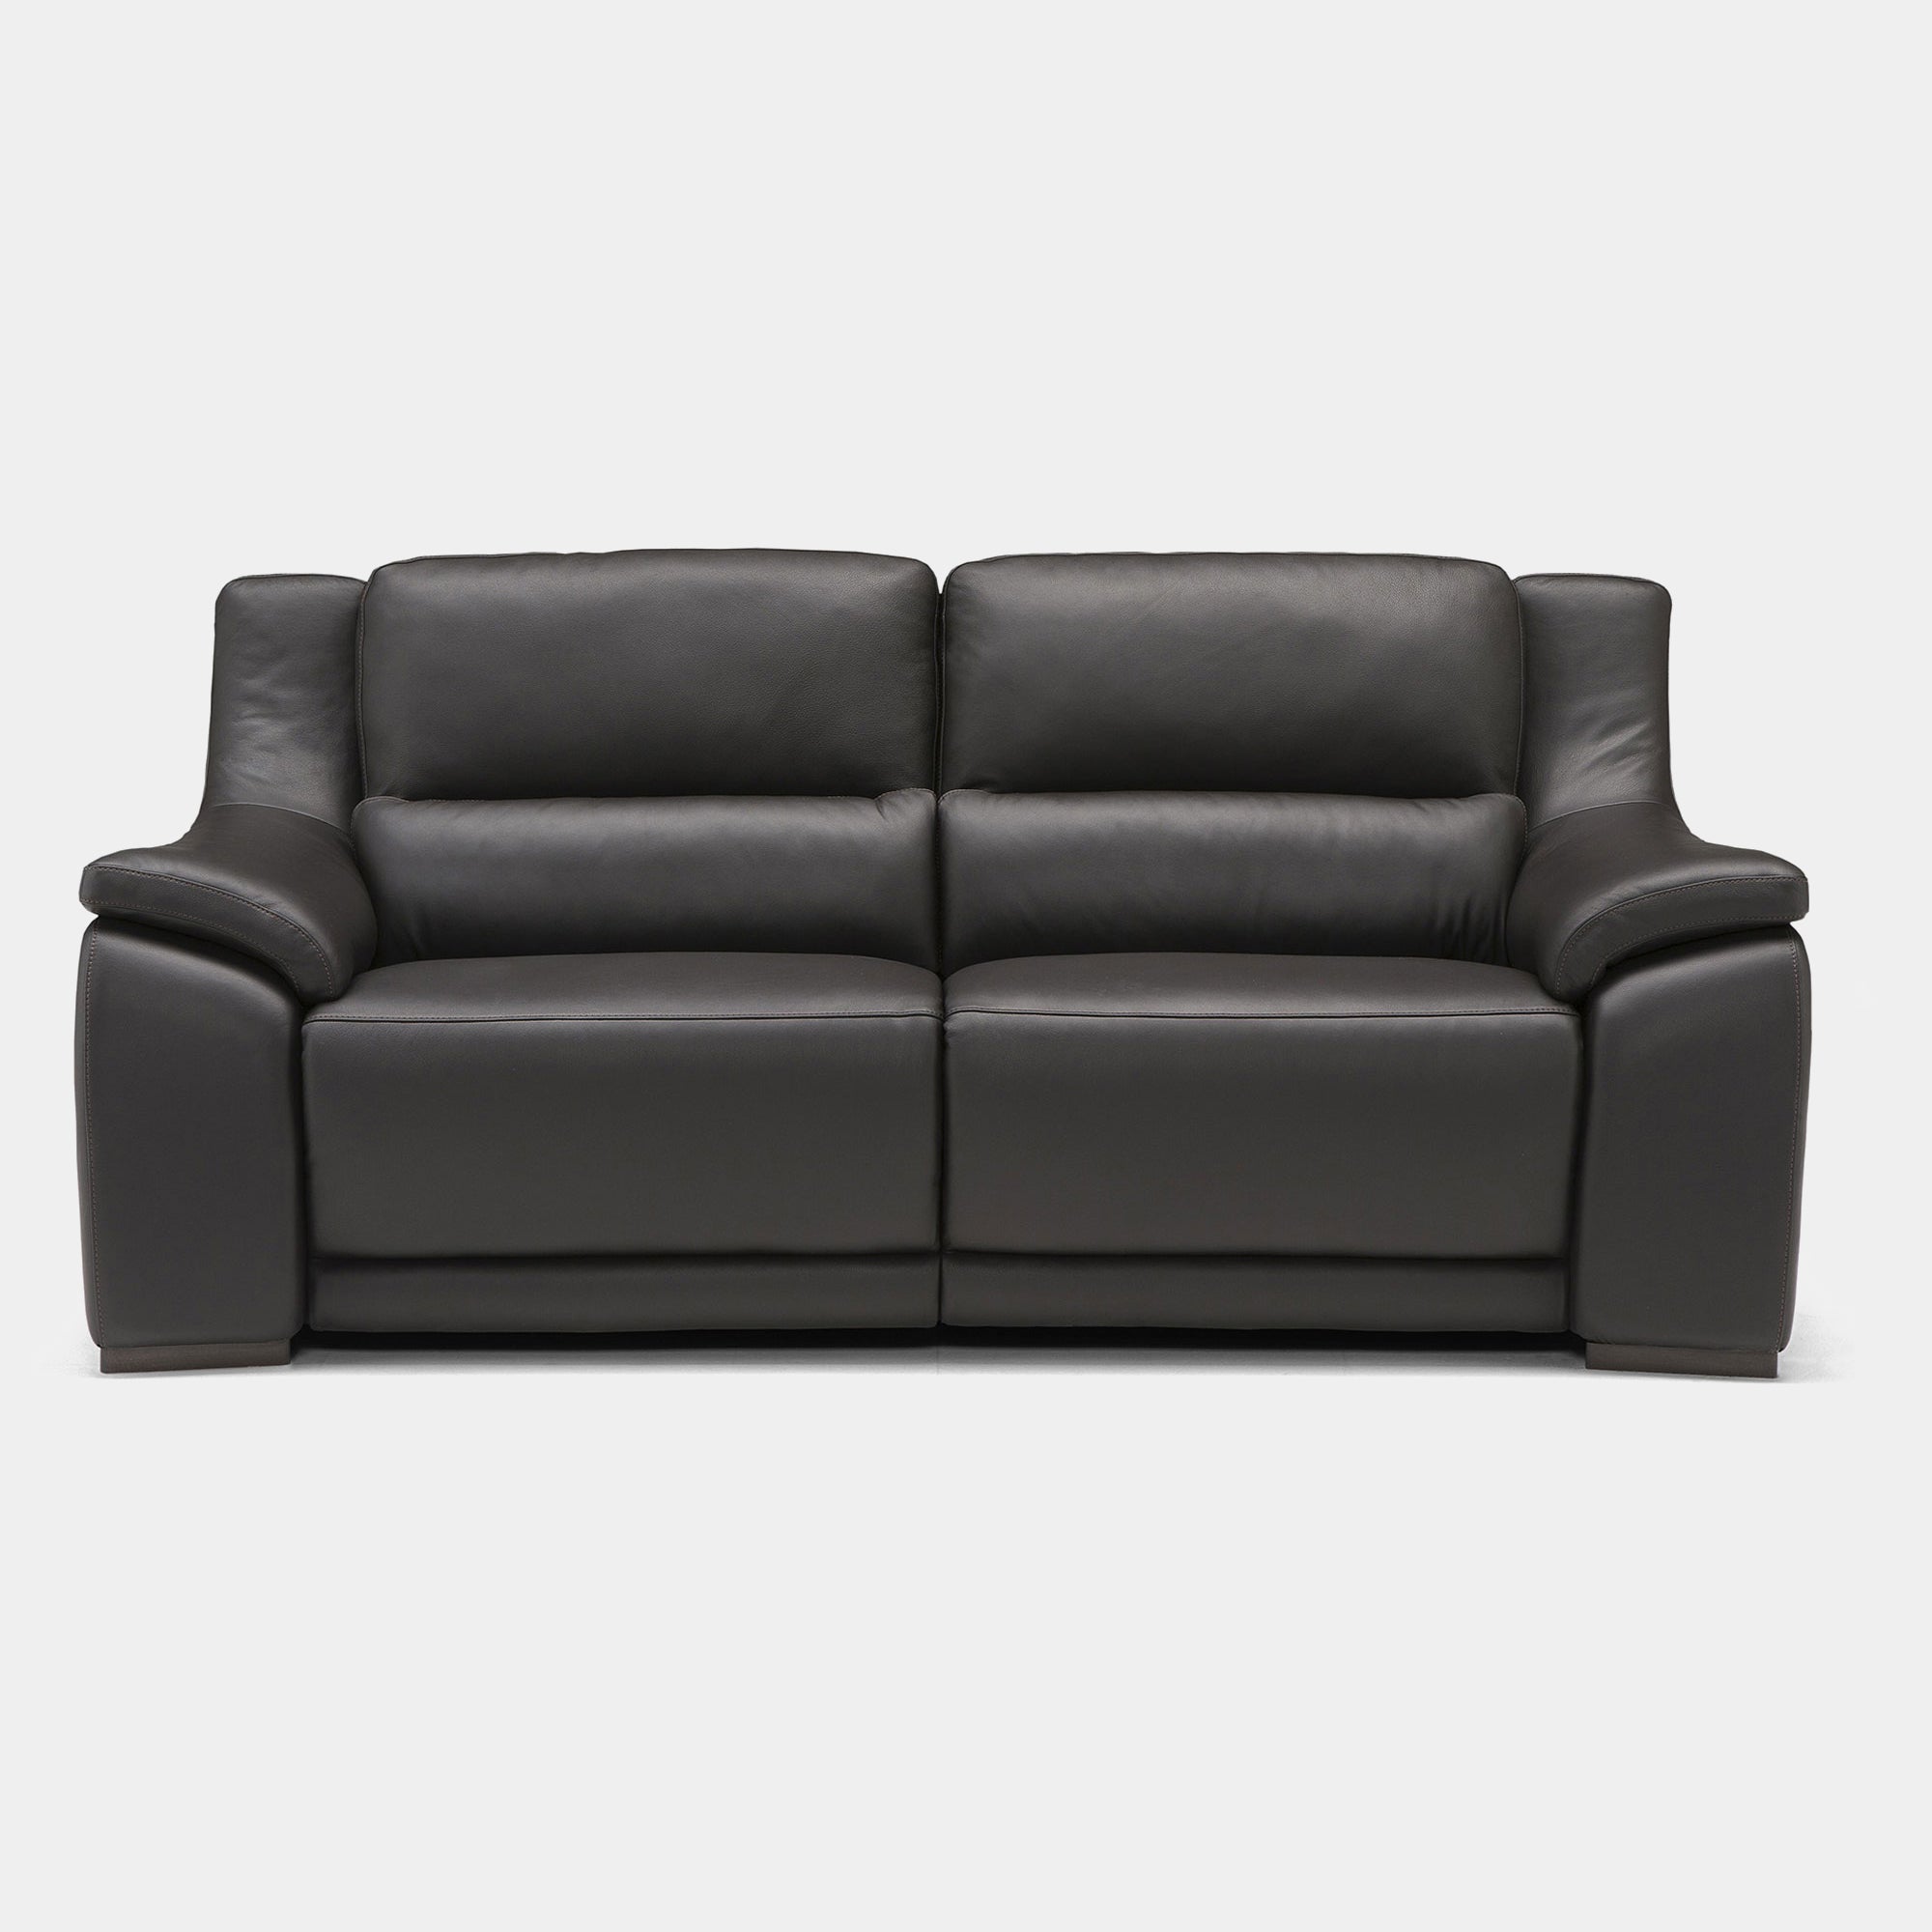 Arezzo - 3 Seat Power Recliner Sofa In Leather Cat L15